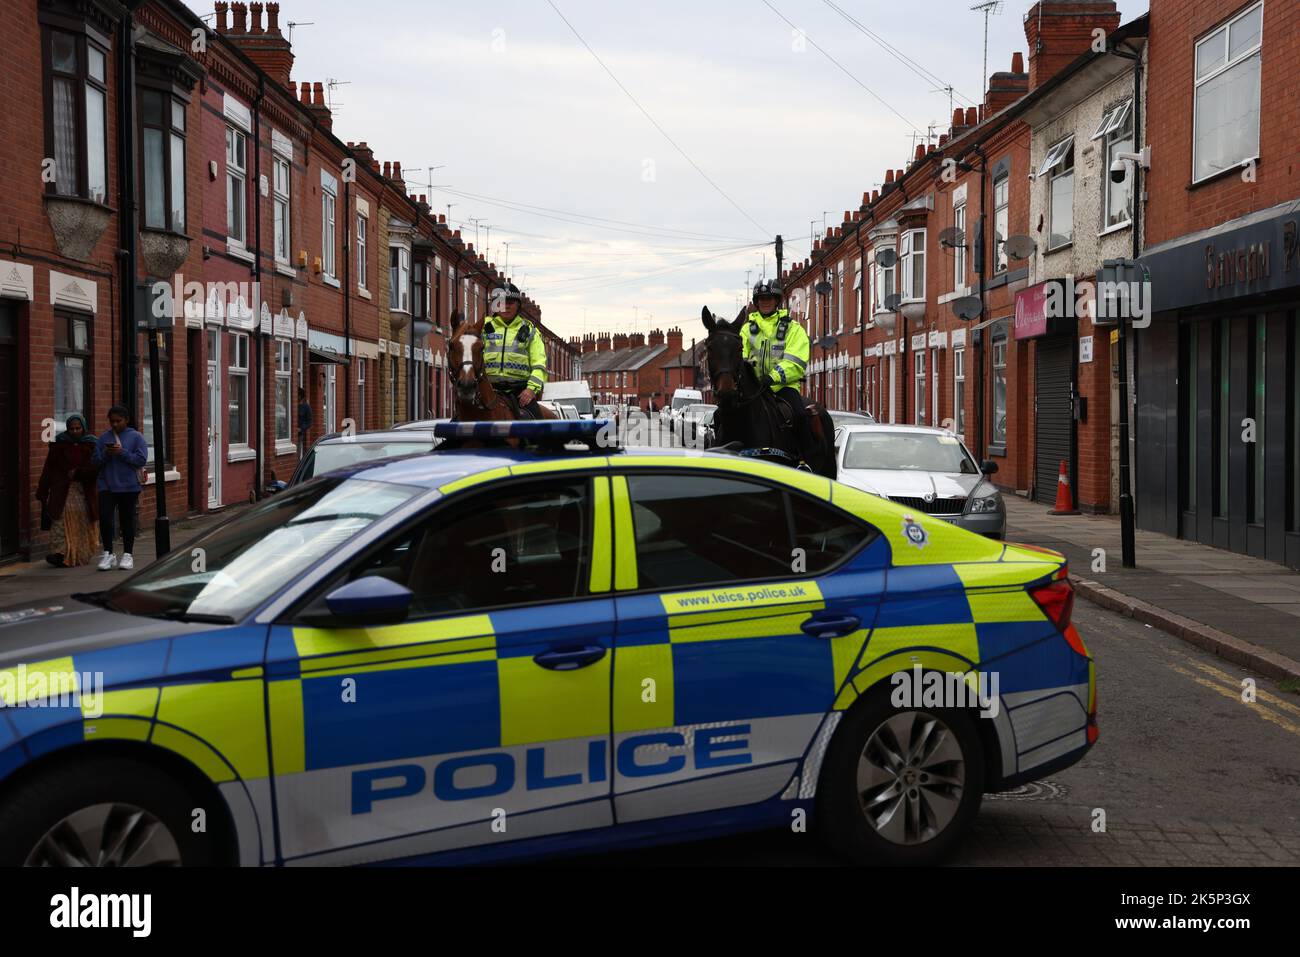 Leicester, Leicestershire, UK. 9th October 2022. Mounted police officers guard the streets during the Diwali lights annual switch on event. LeicesterÔs celebration of Diwali is one of the biggest outside of India. Credit Darren Staples/Alamy Live News. Stock Photo